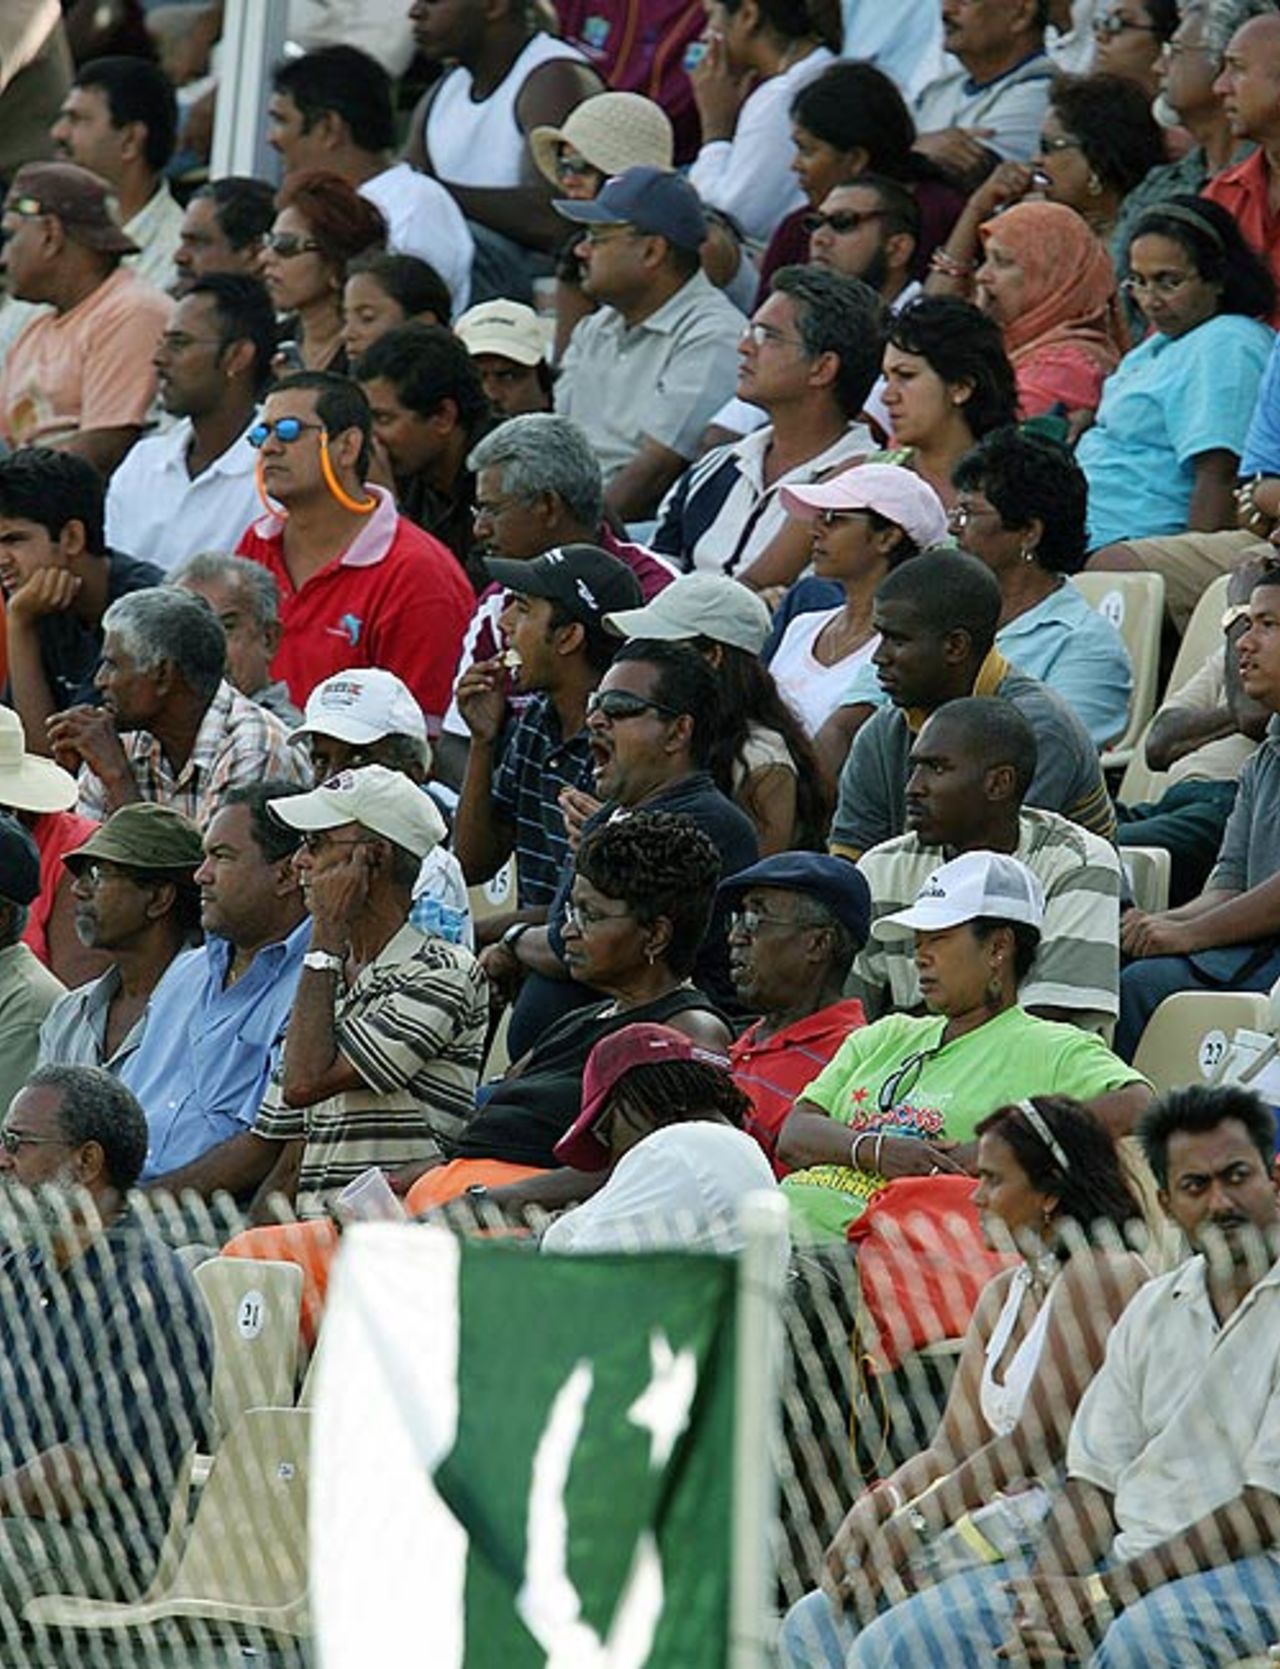 Cricket fans watch Pakistan batting during a warm-up match, Port of Spain, World Cup warm-up, March 9, 2007